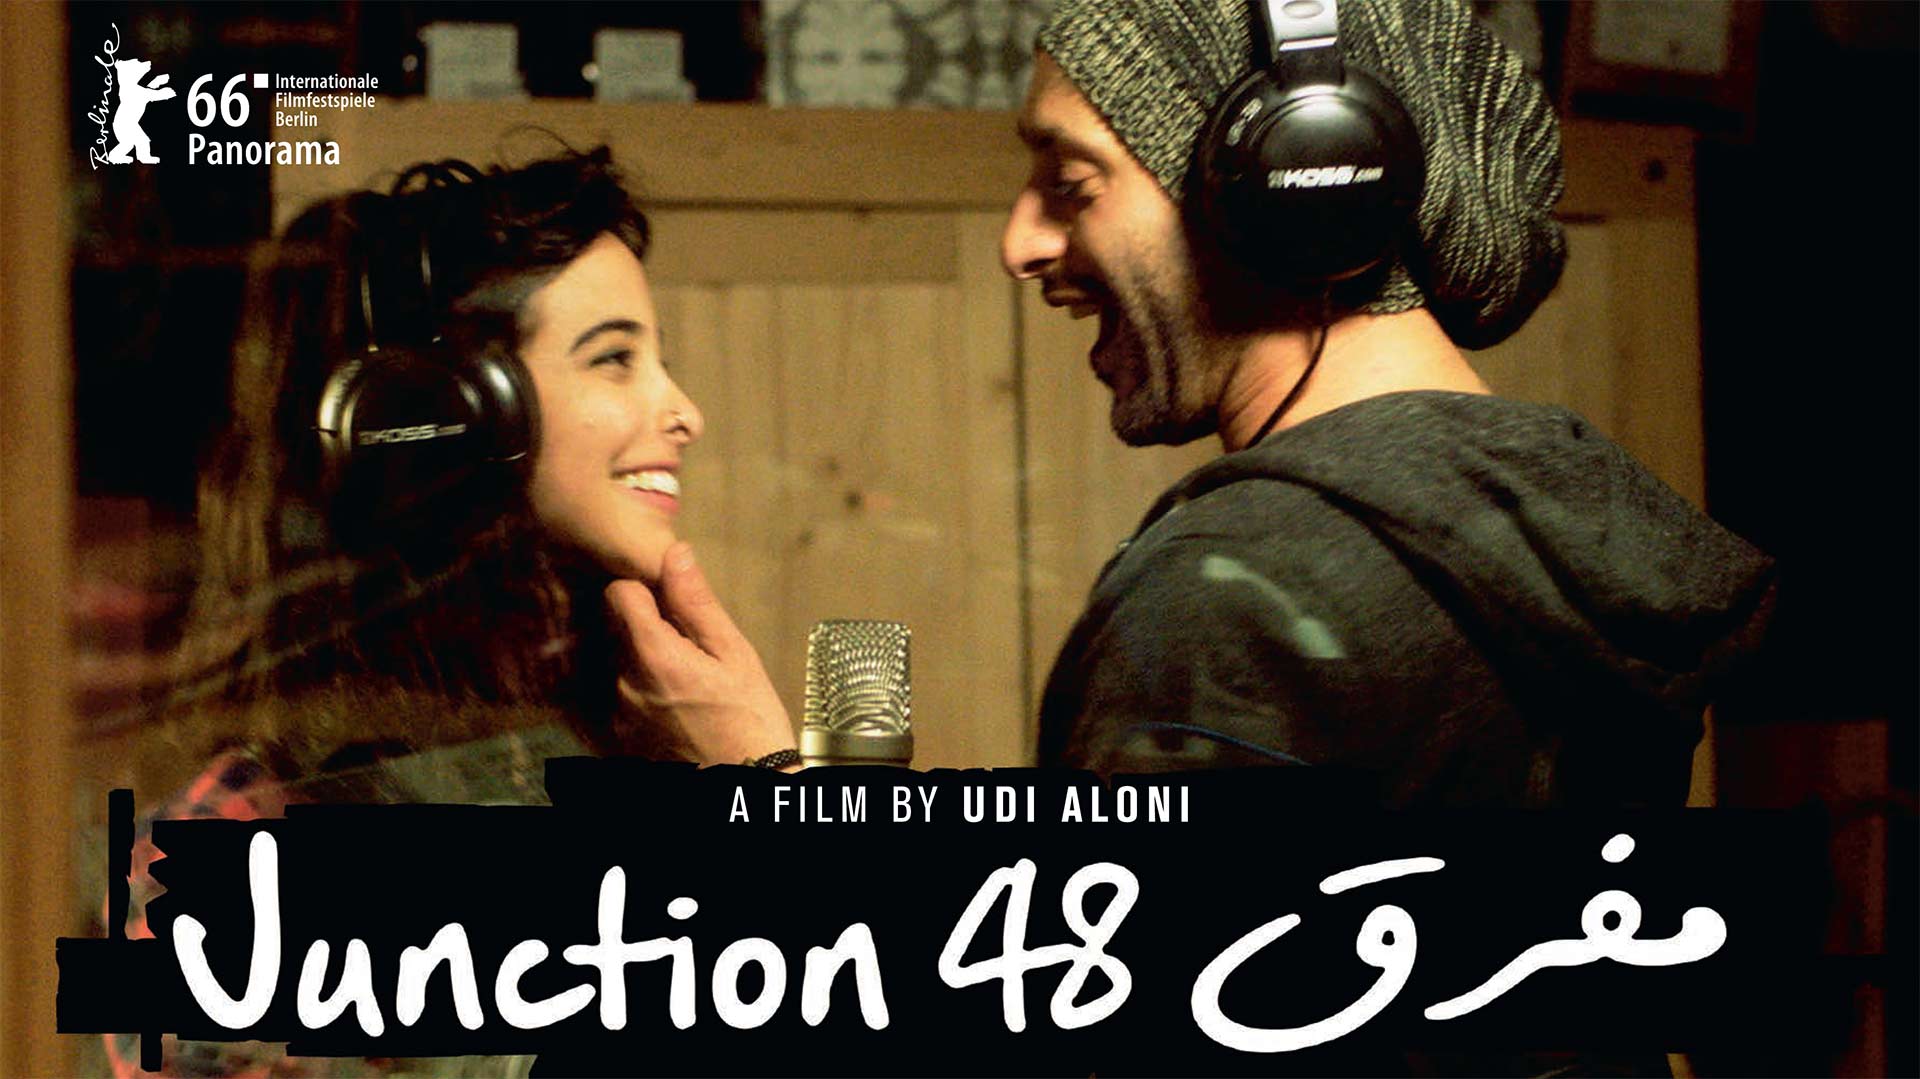 junction 48, a film by Udi Aloni, two people interacting